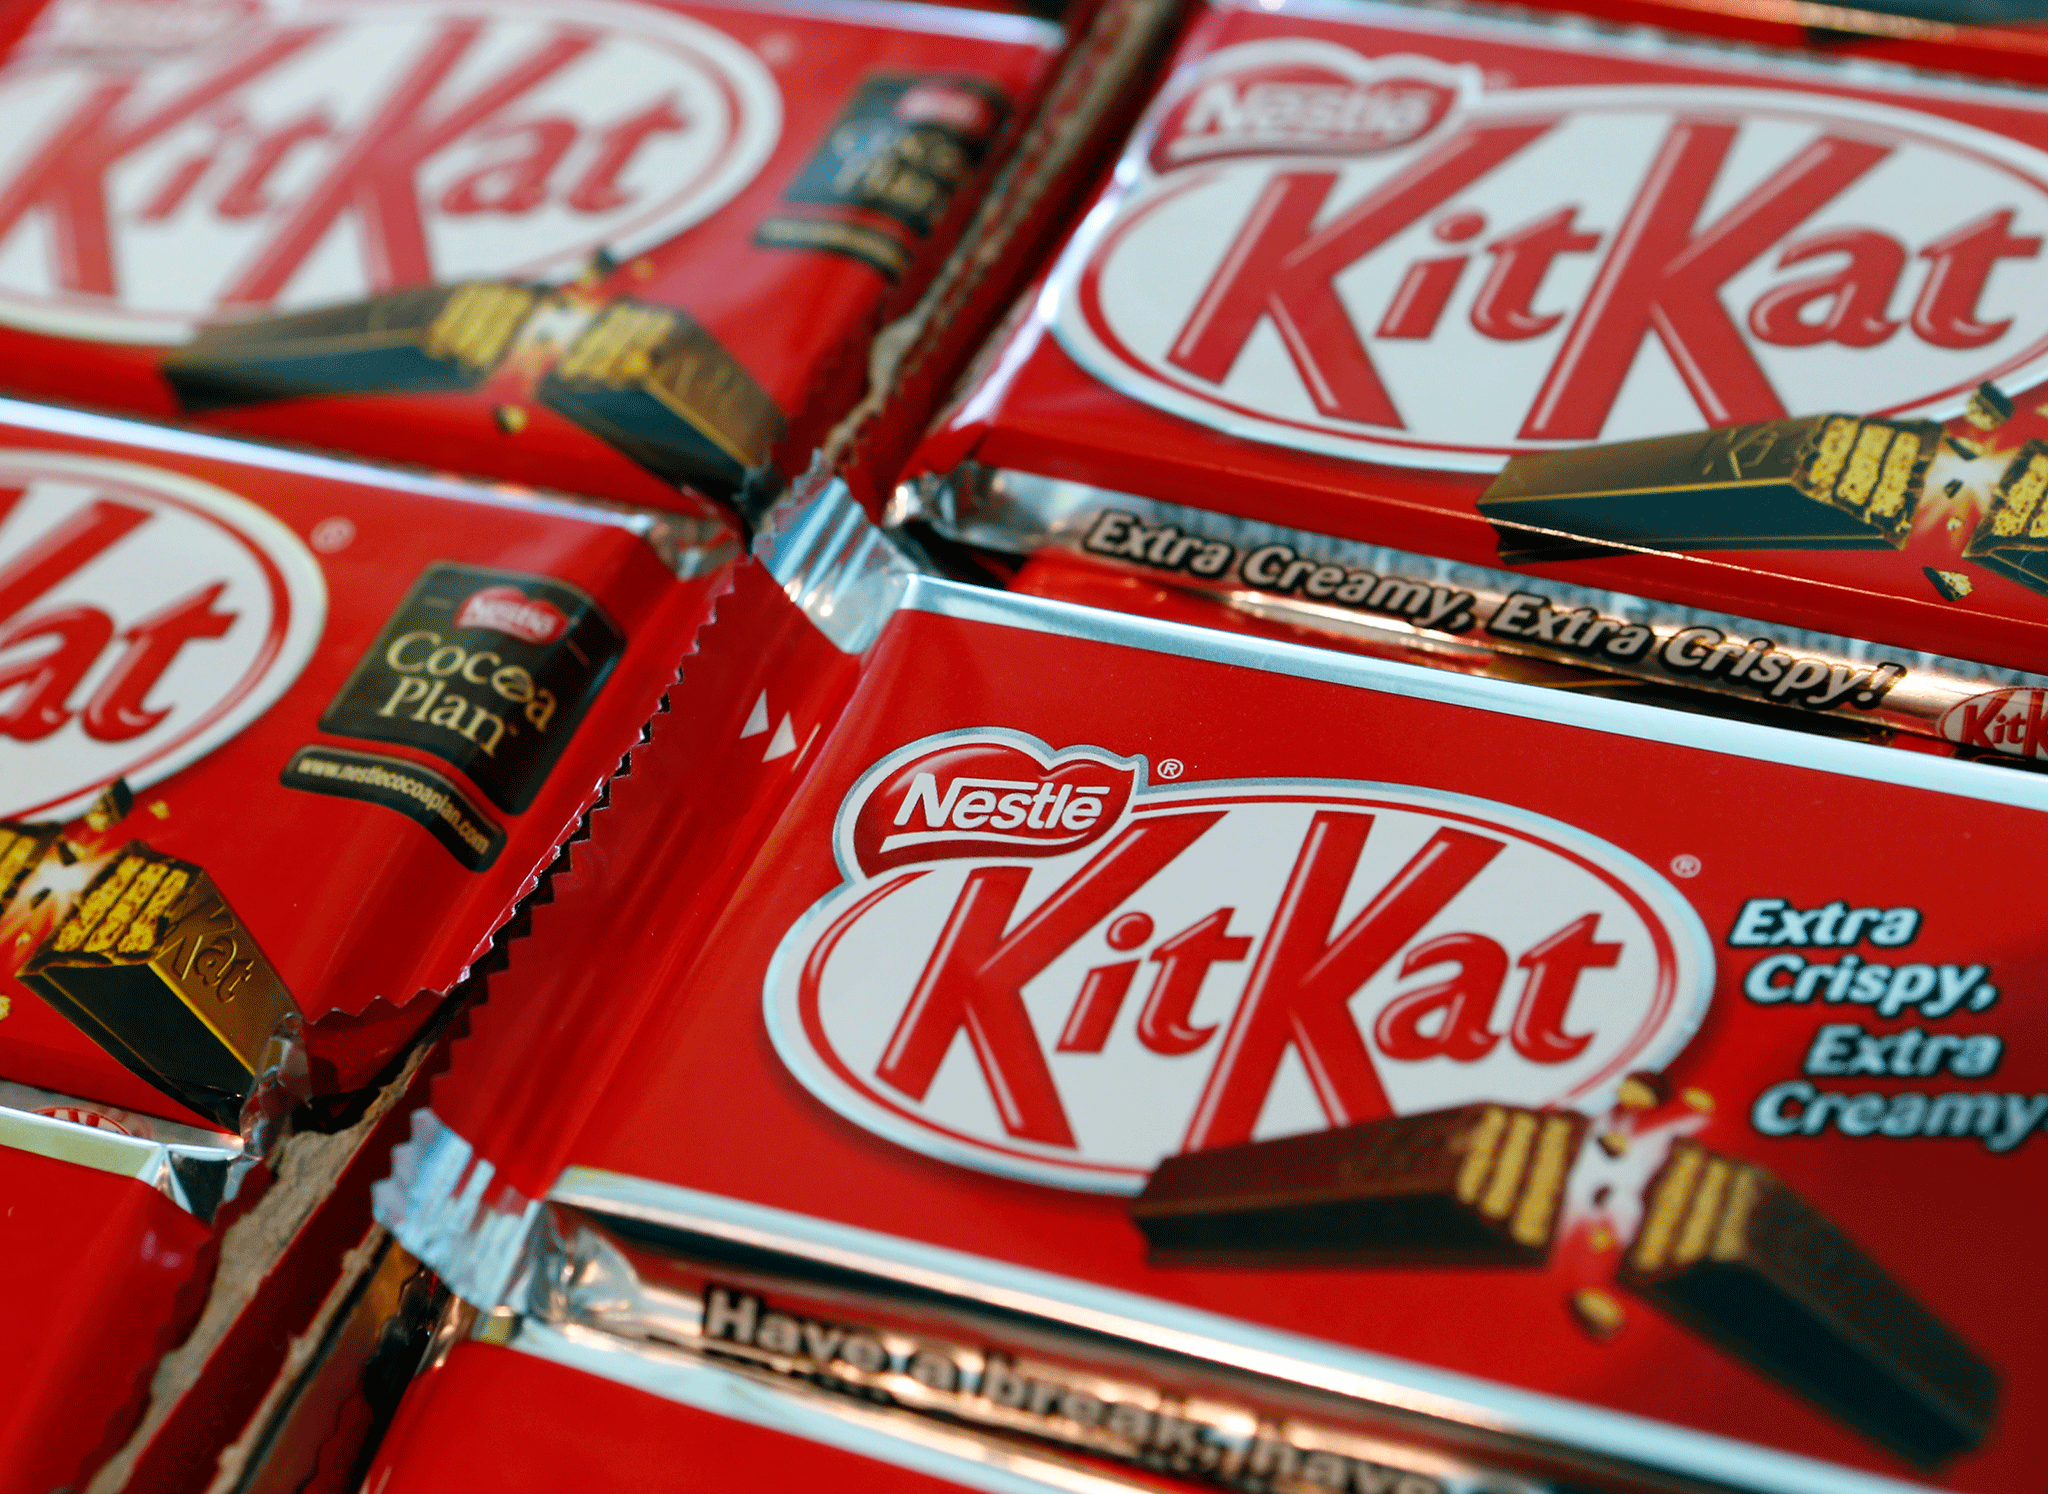 KitKat's chocolate bar 'will not be downsized due to Brexit'